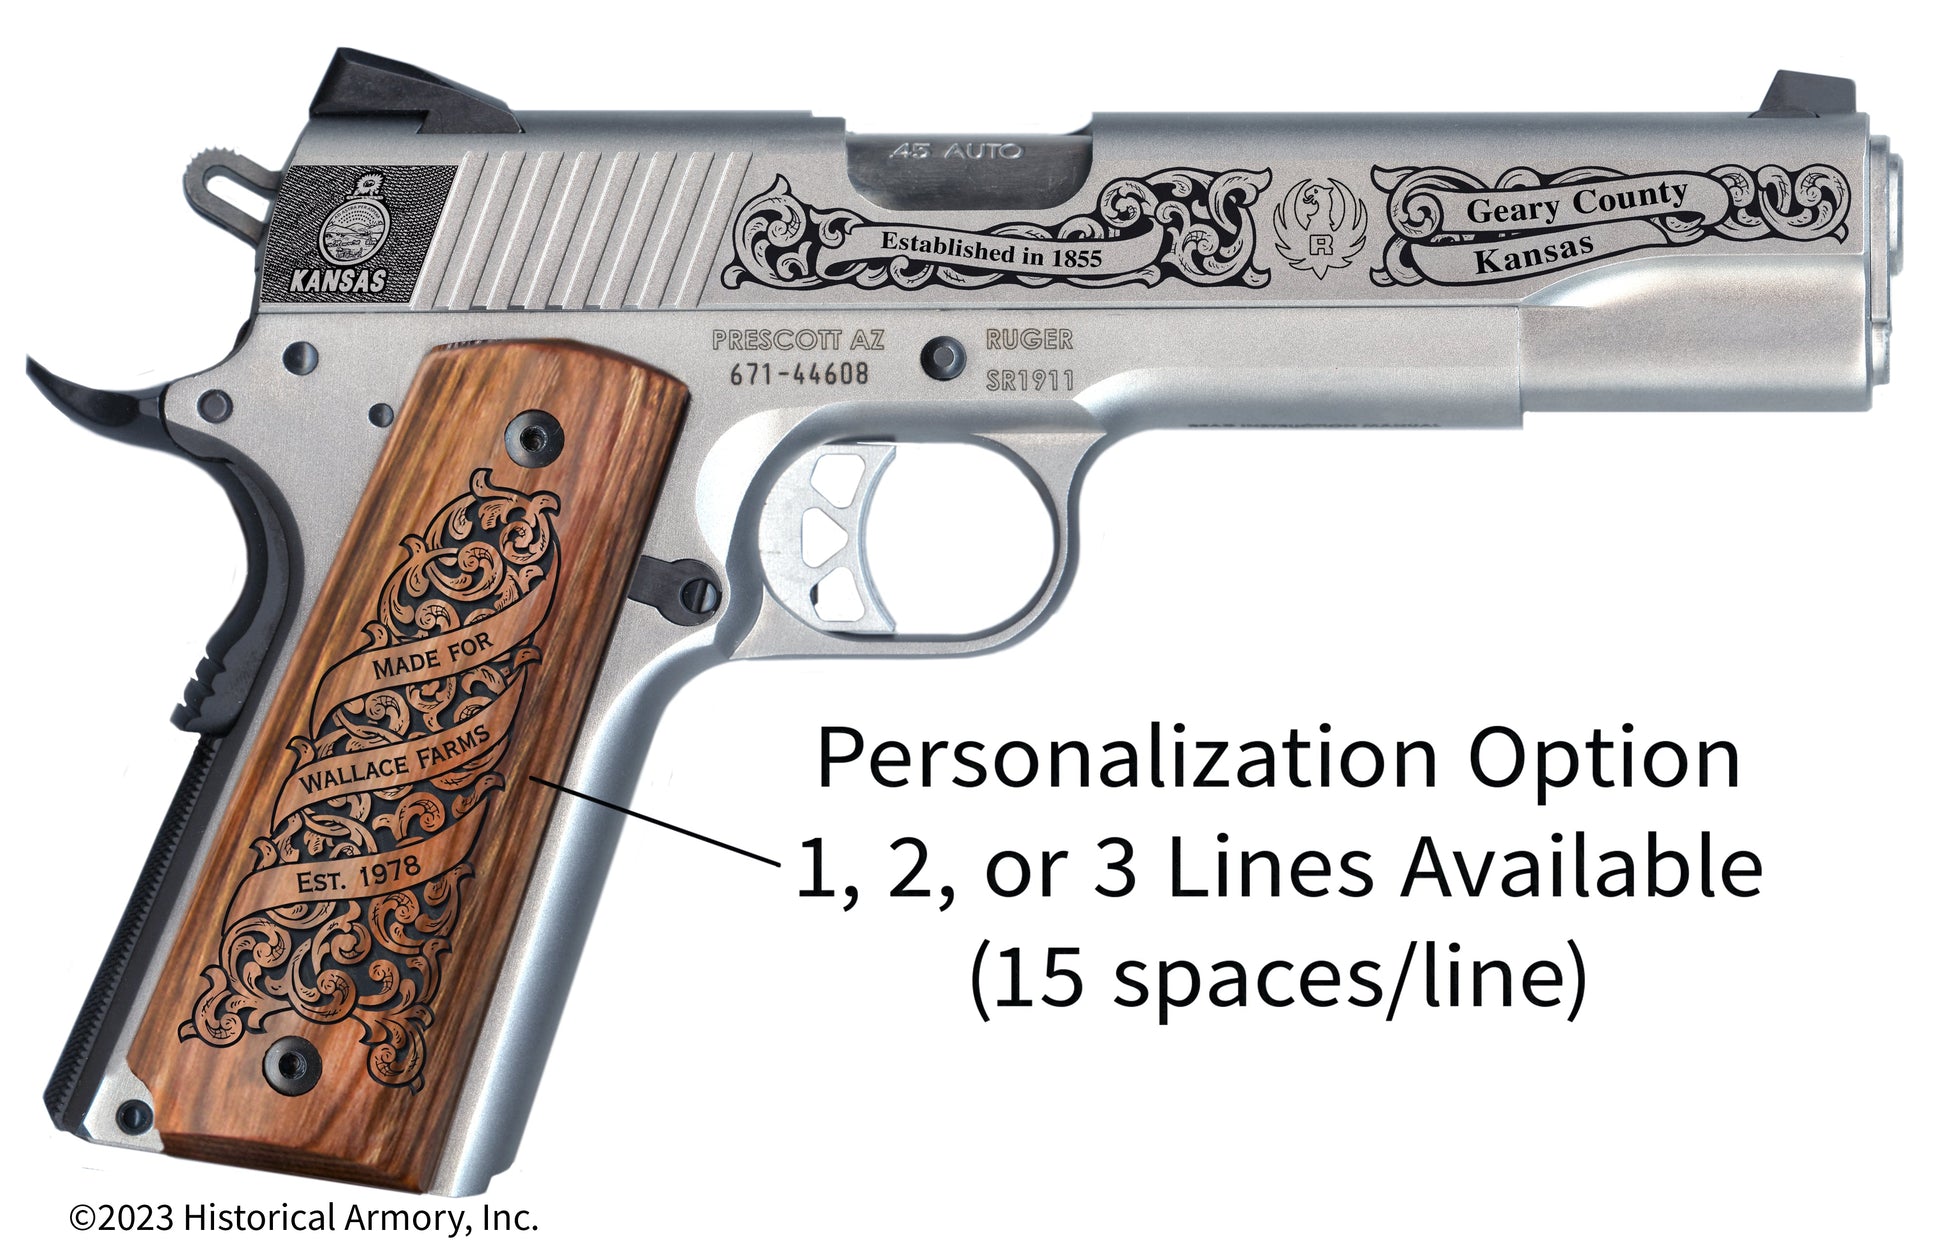 Geary County Kansas Personalized Engraved .45 Auto Ruger 1911